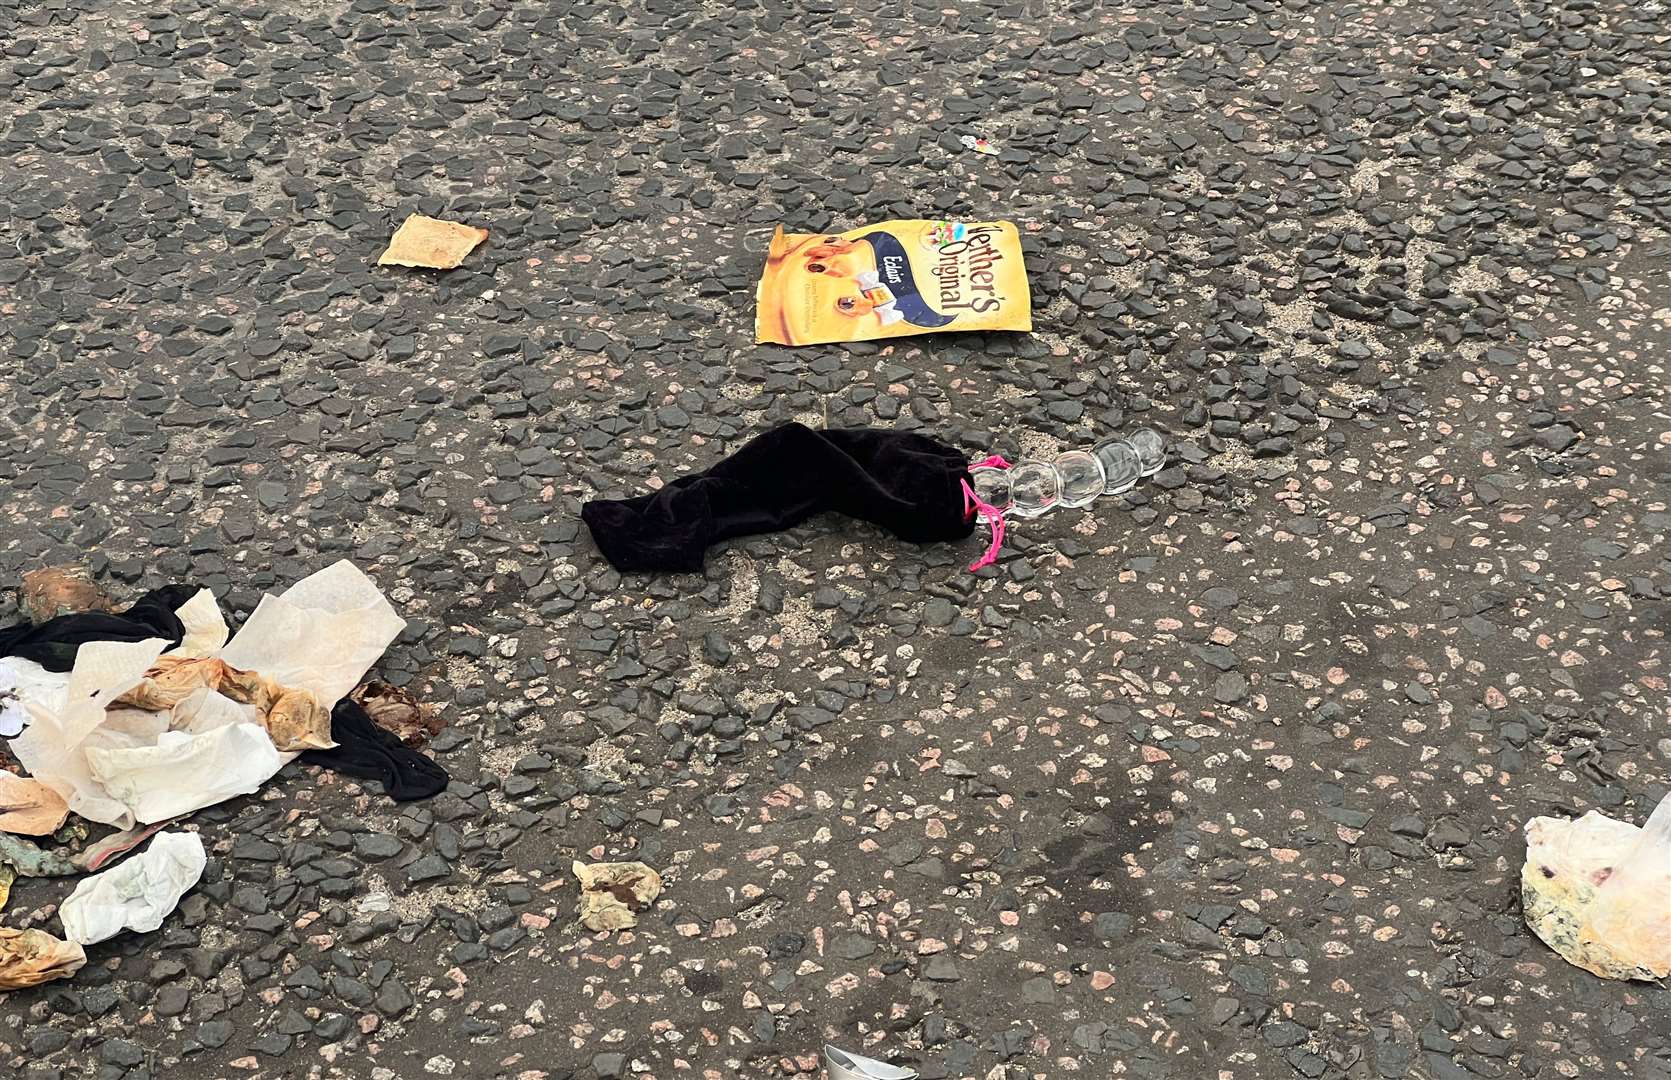 Sex toys were spotted on the street